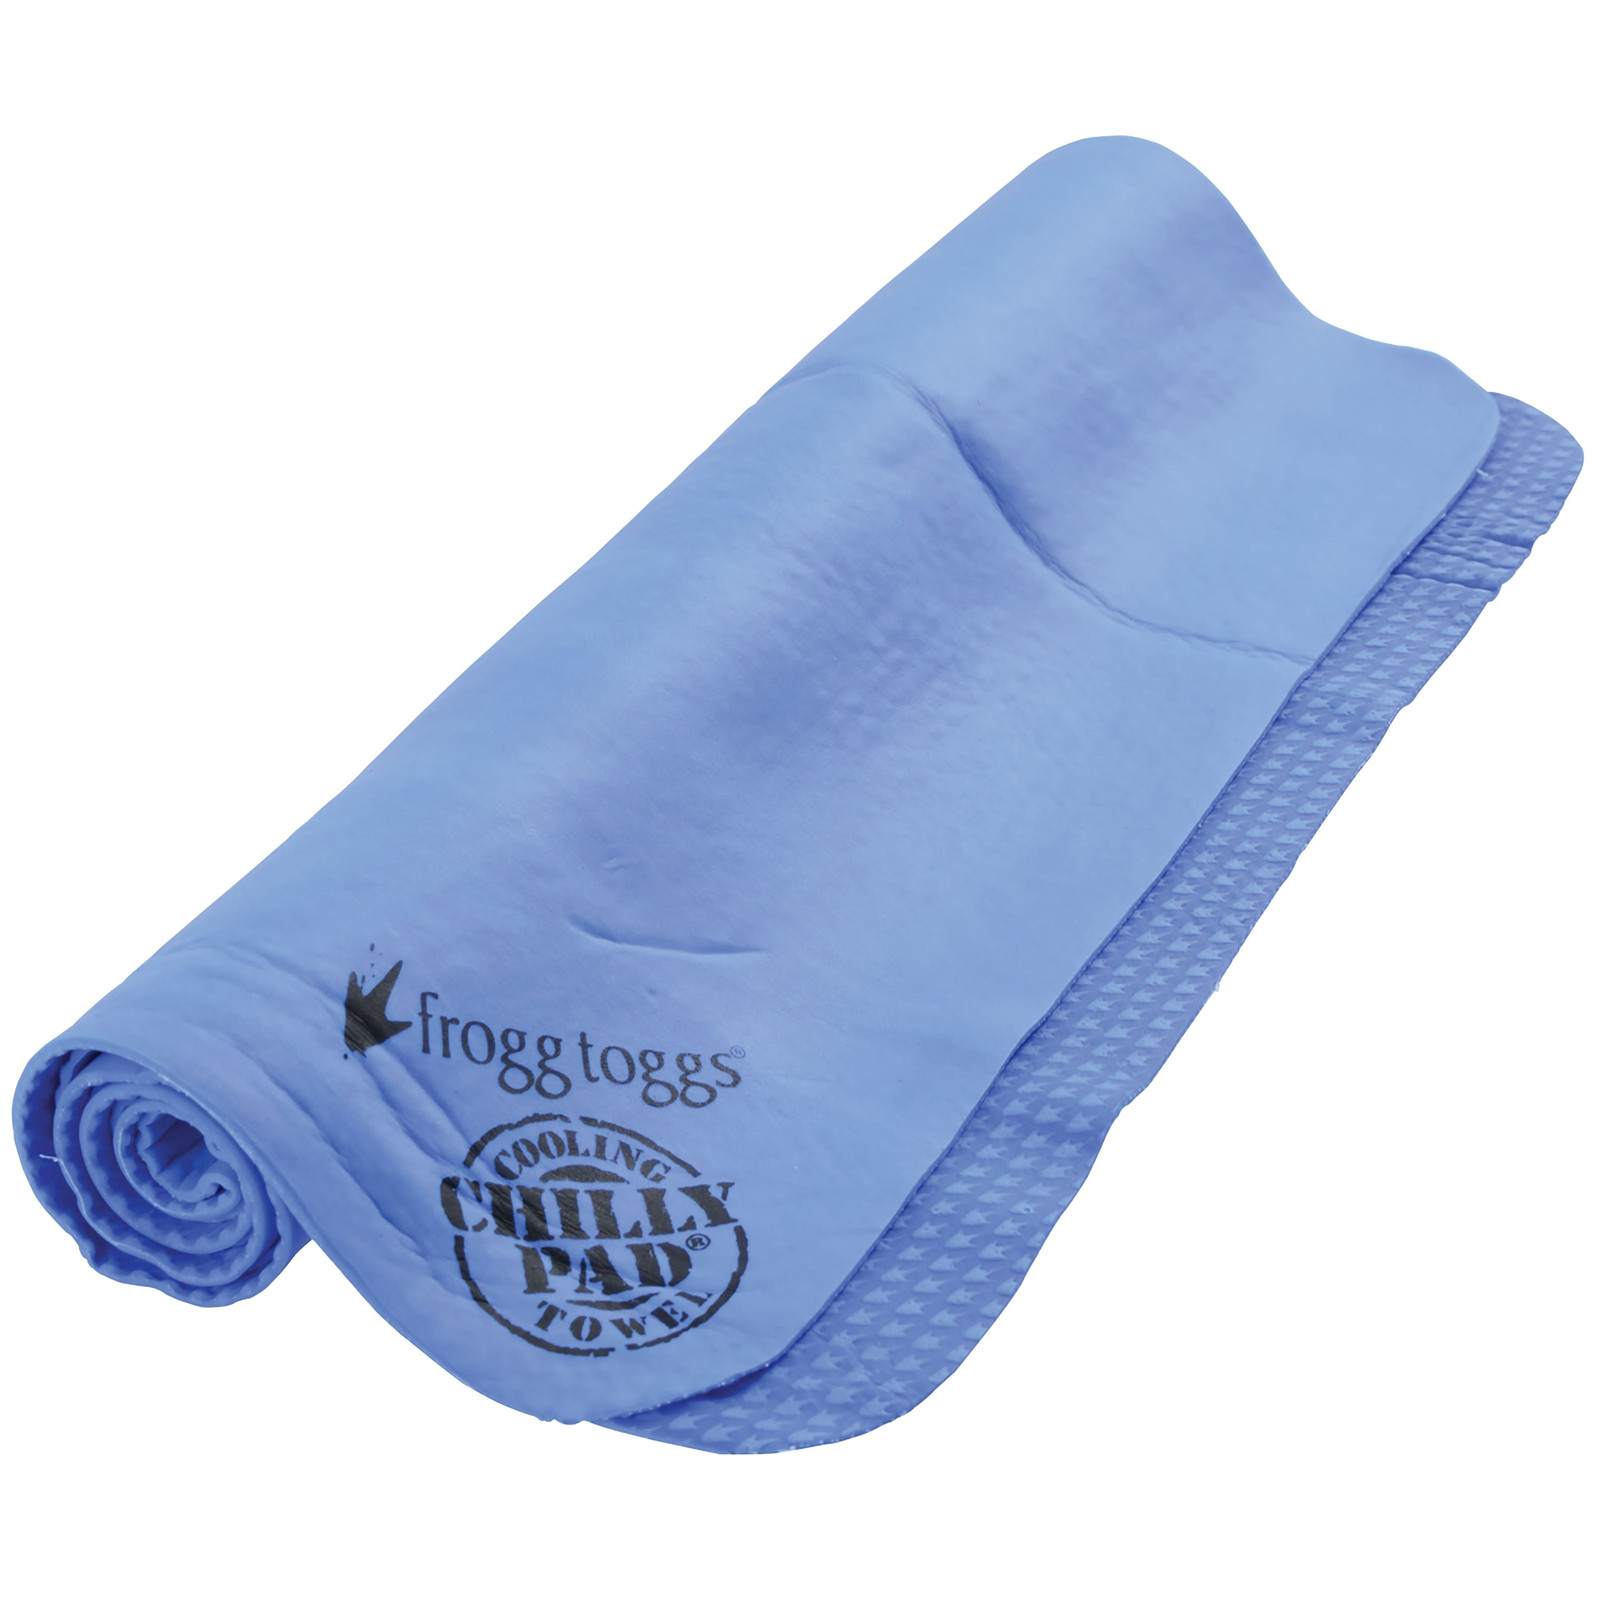 Chilly Pad® Cooling Towel